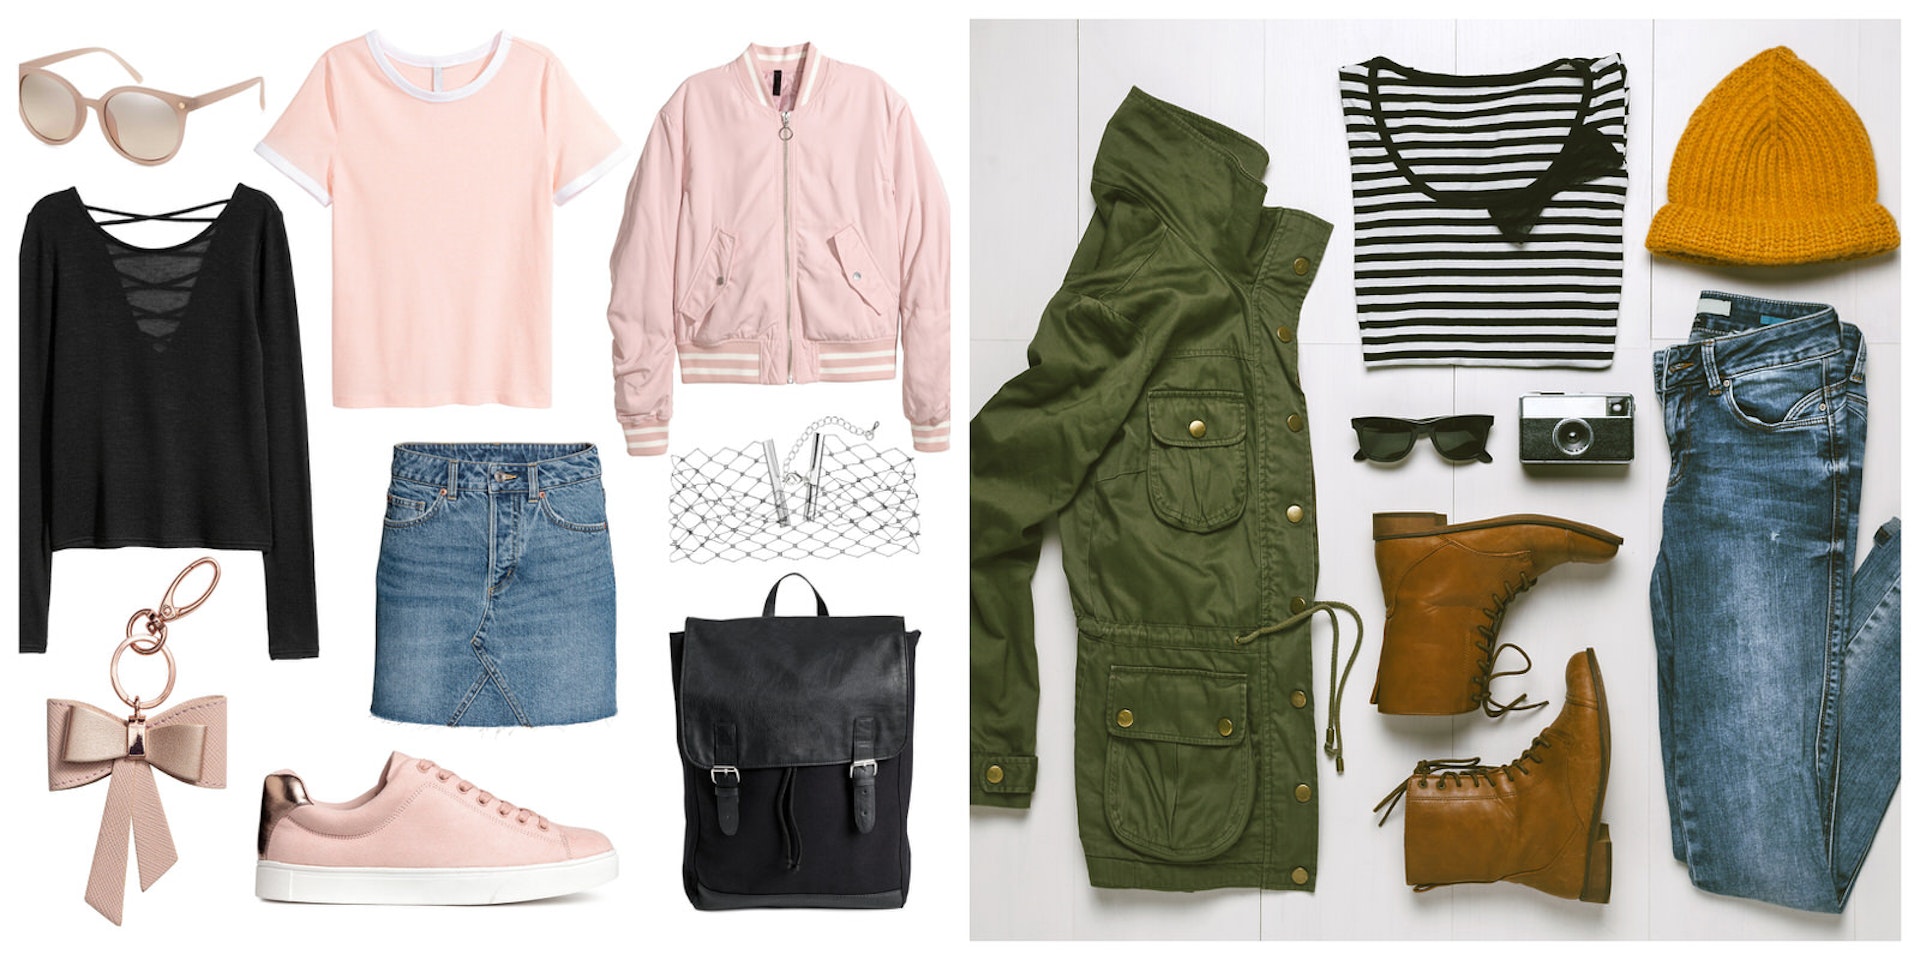 On the left is a picture of a black long sleeved top, black backpack, denim midi-skirt, pink trainer, t-shirt and jacket, sunglasses and key chain. On the right is an olive parka, striped t-shirt, brown boots, blue jeans, yellow wooly hat and black sunglasses – good options for Ireland